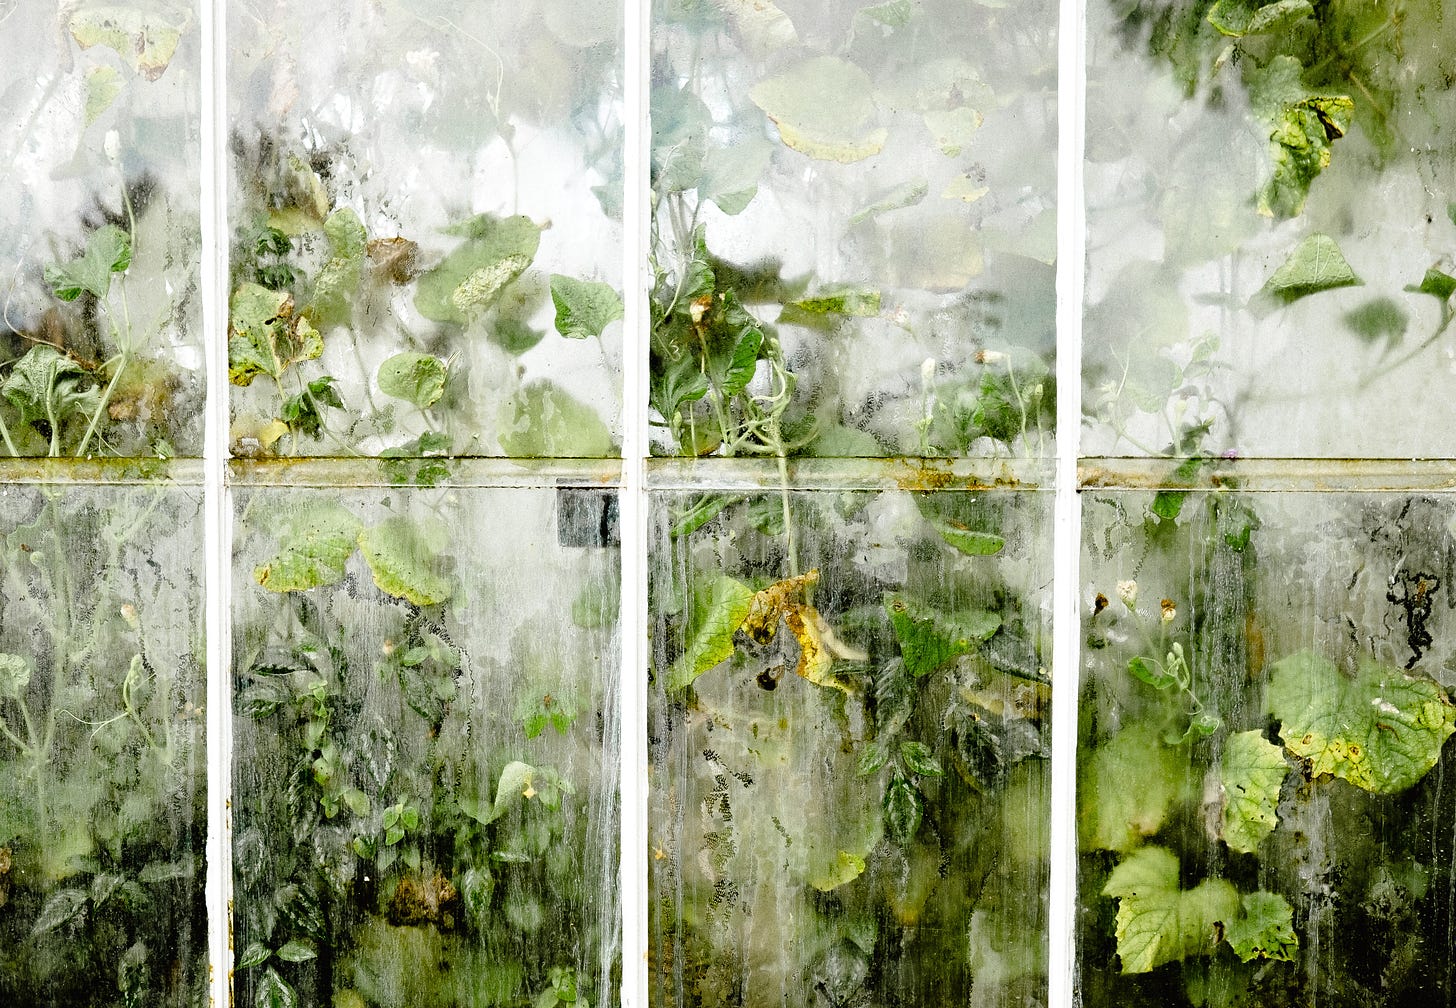 Photo of a very humid greenhouse, plants pressing up against the wet windows.